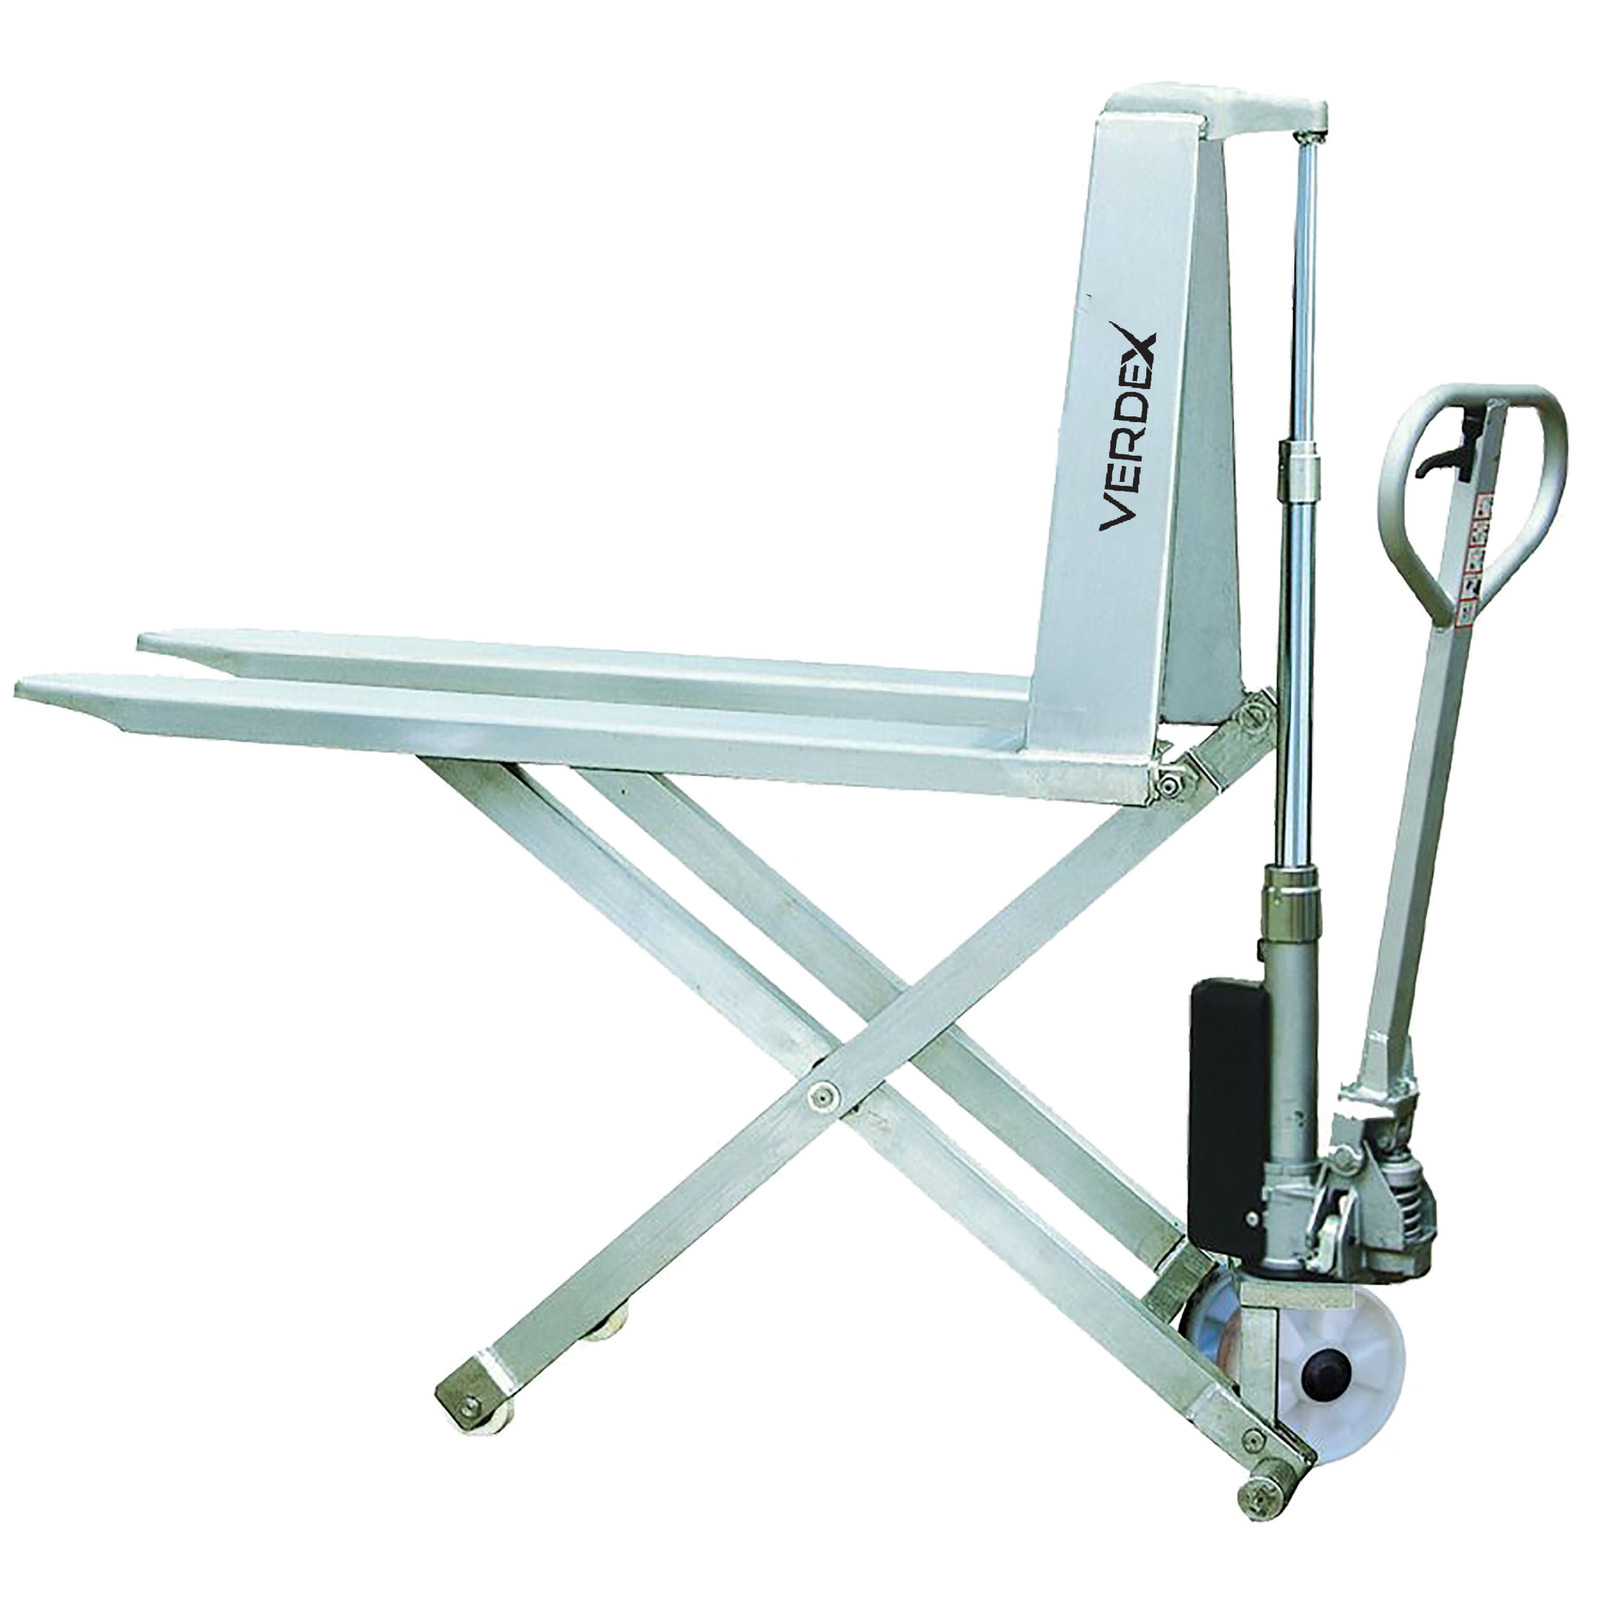 Stainless Steel Hi-Lift Pallet truck - Manual (540mm wide)